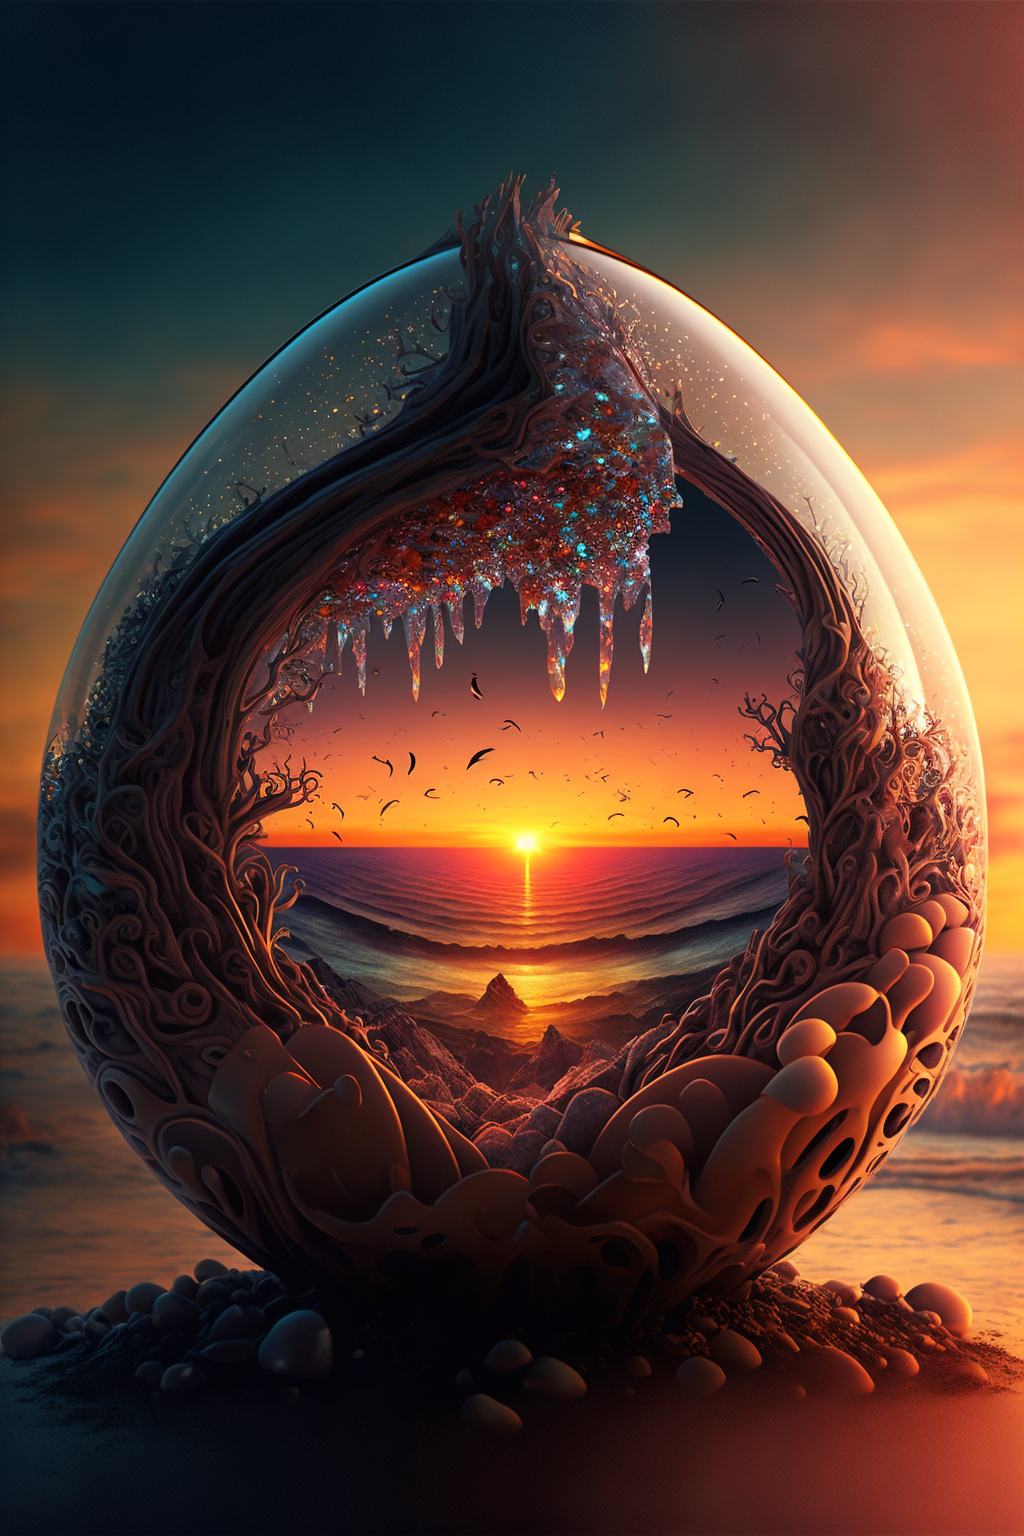 Sunrise in the style of Psytrance UHD 3